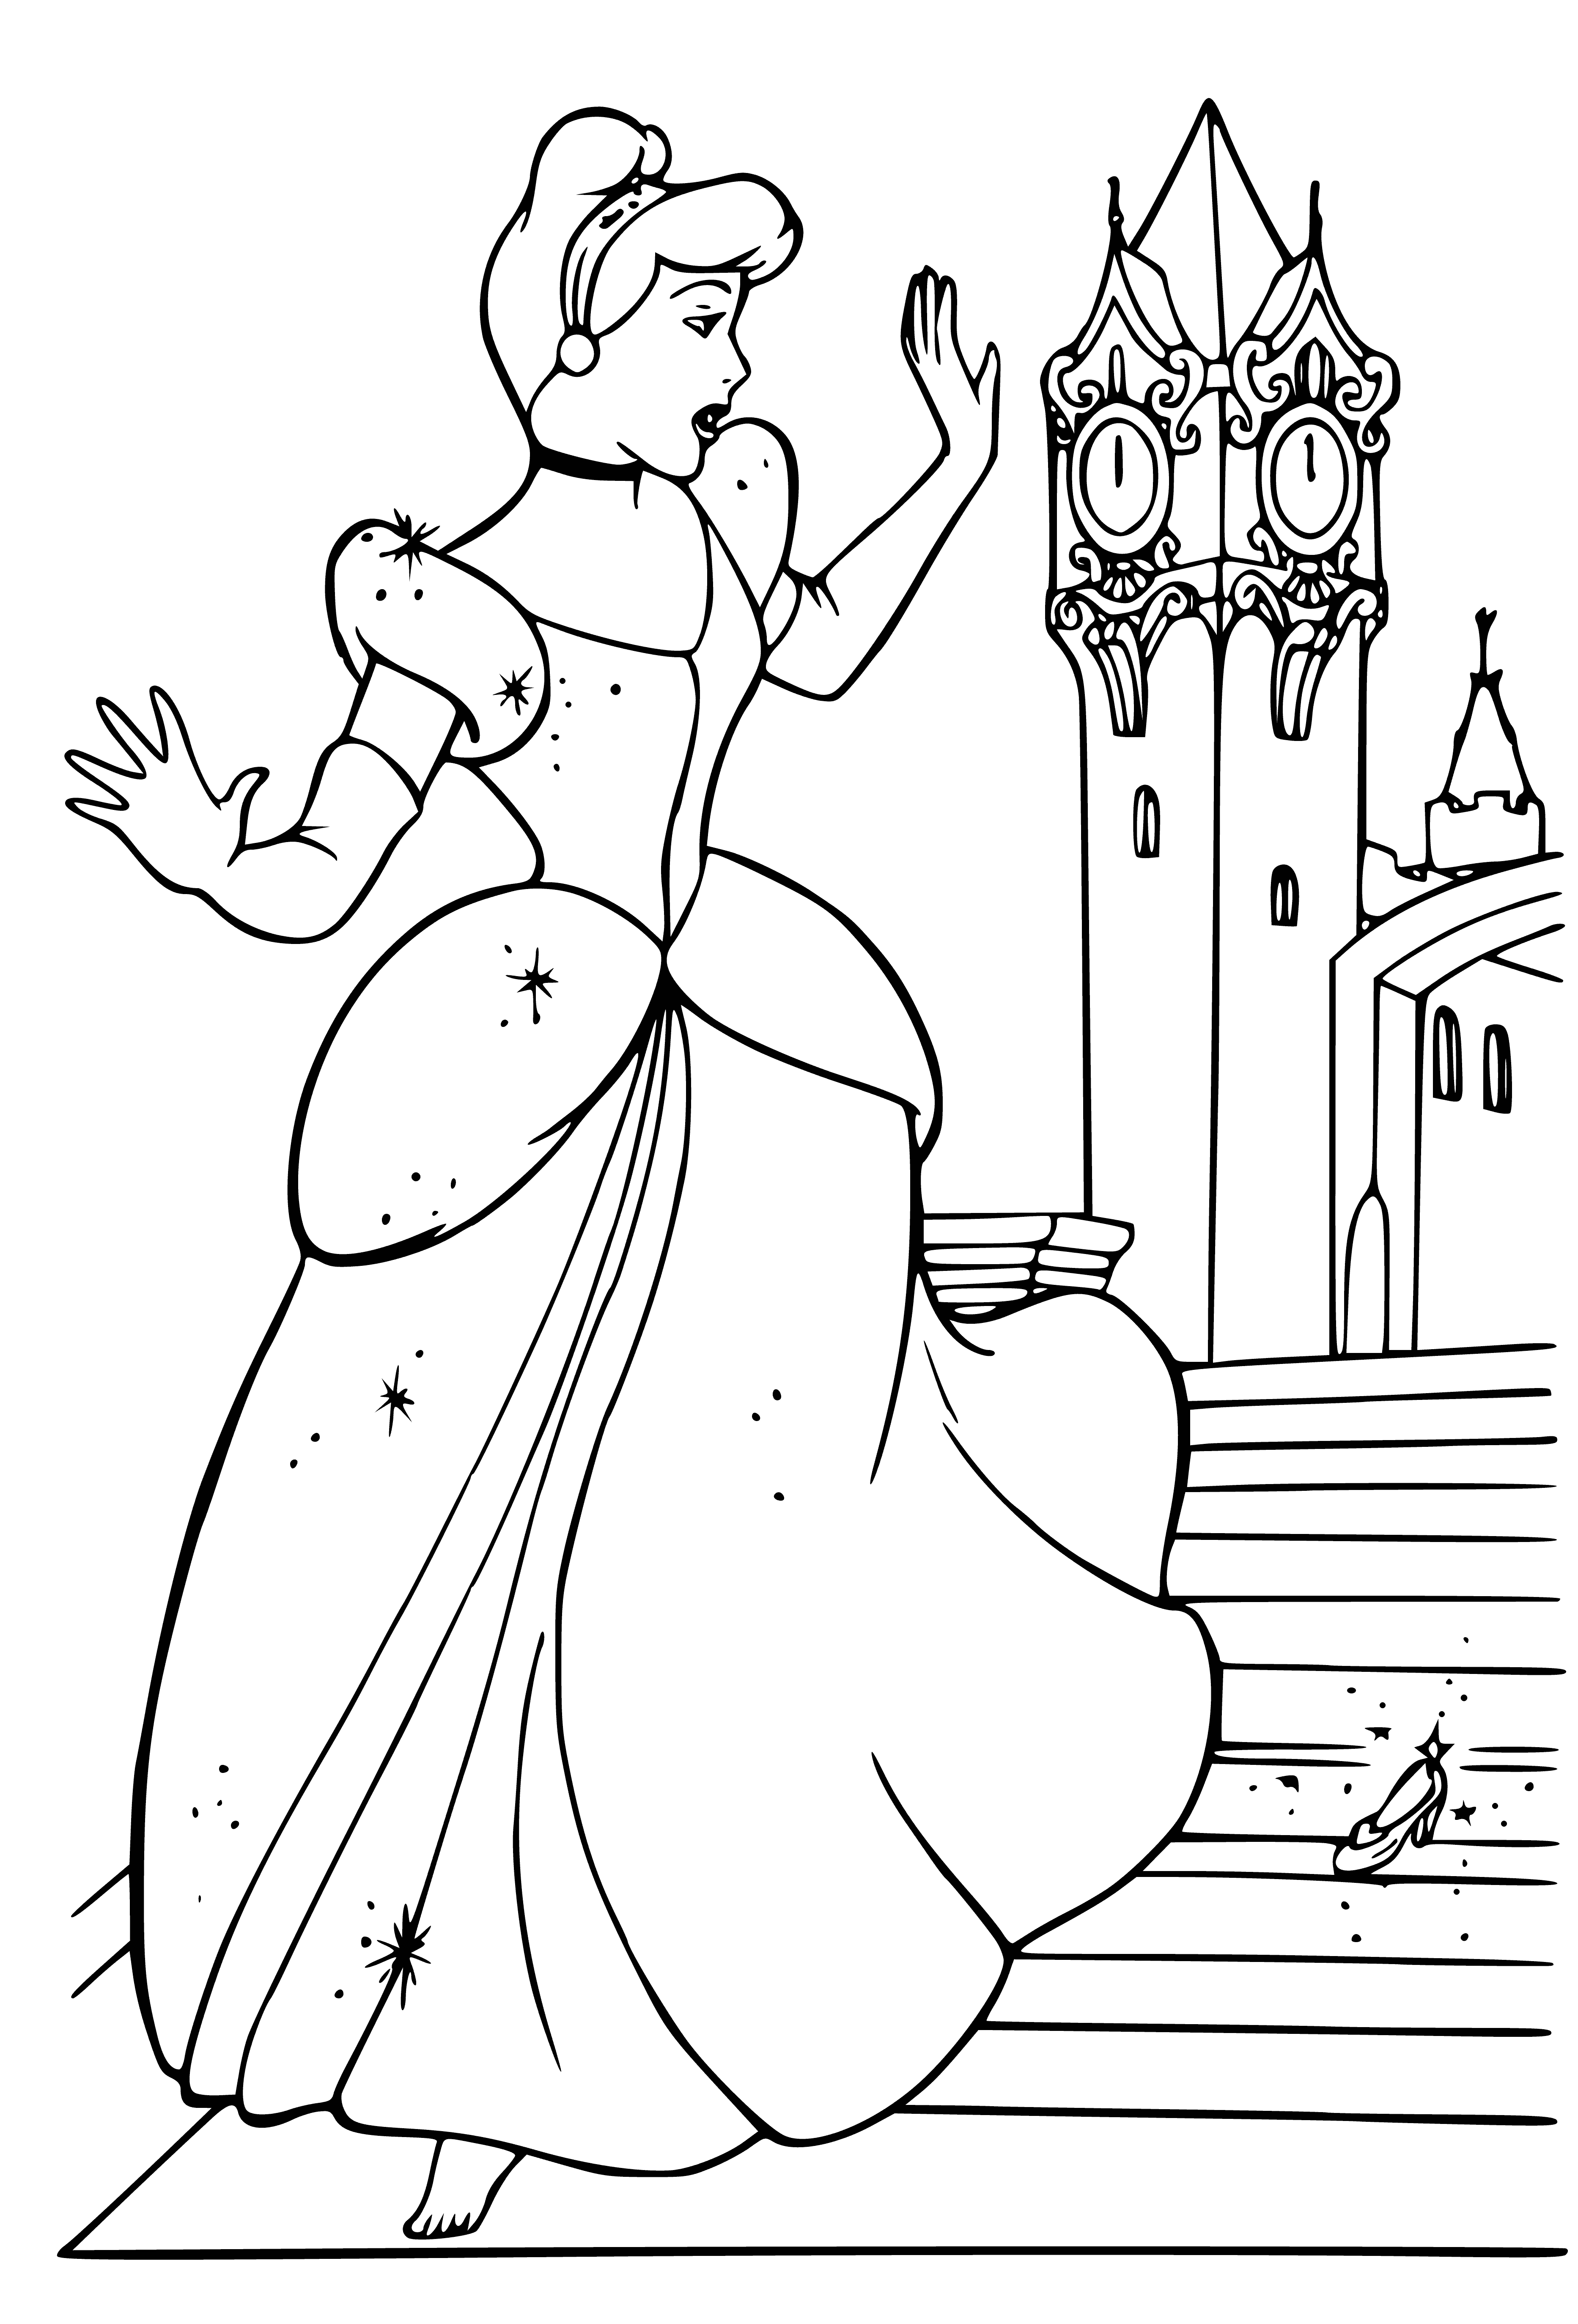 coloring page: A woman stands on a grassy field in a torn, light-colored dress, missing her left shoe. She looks sadly around her.